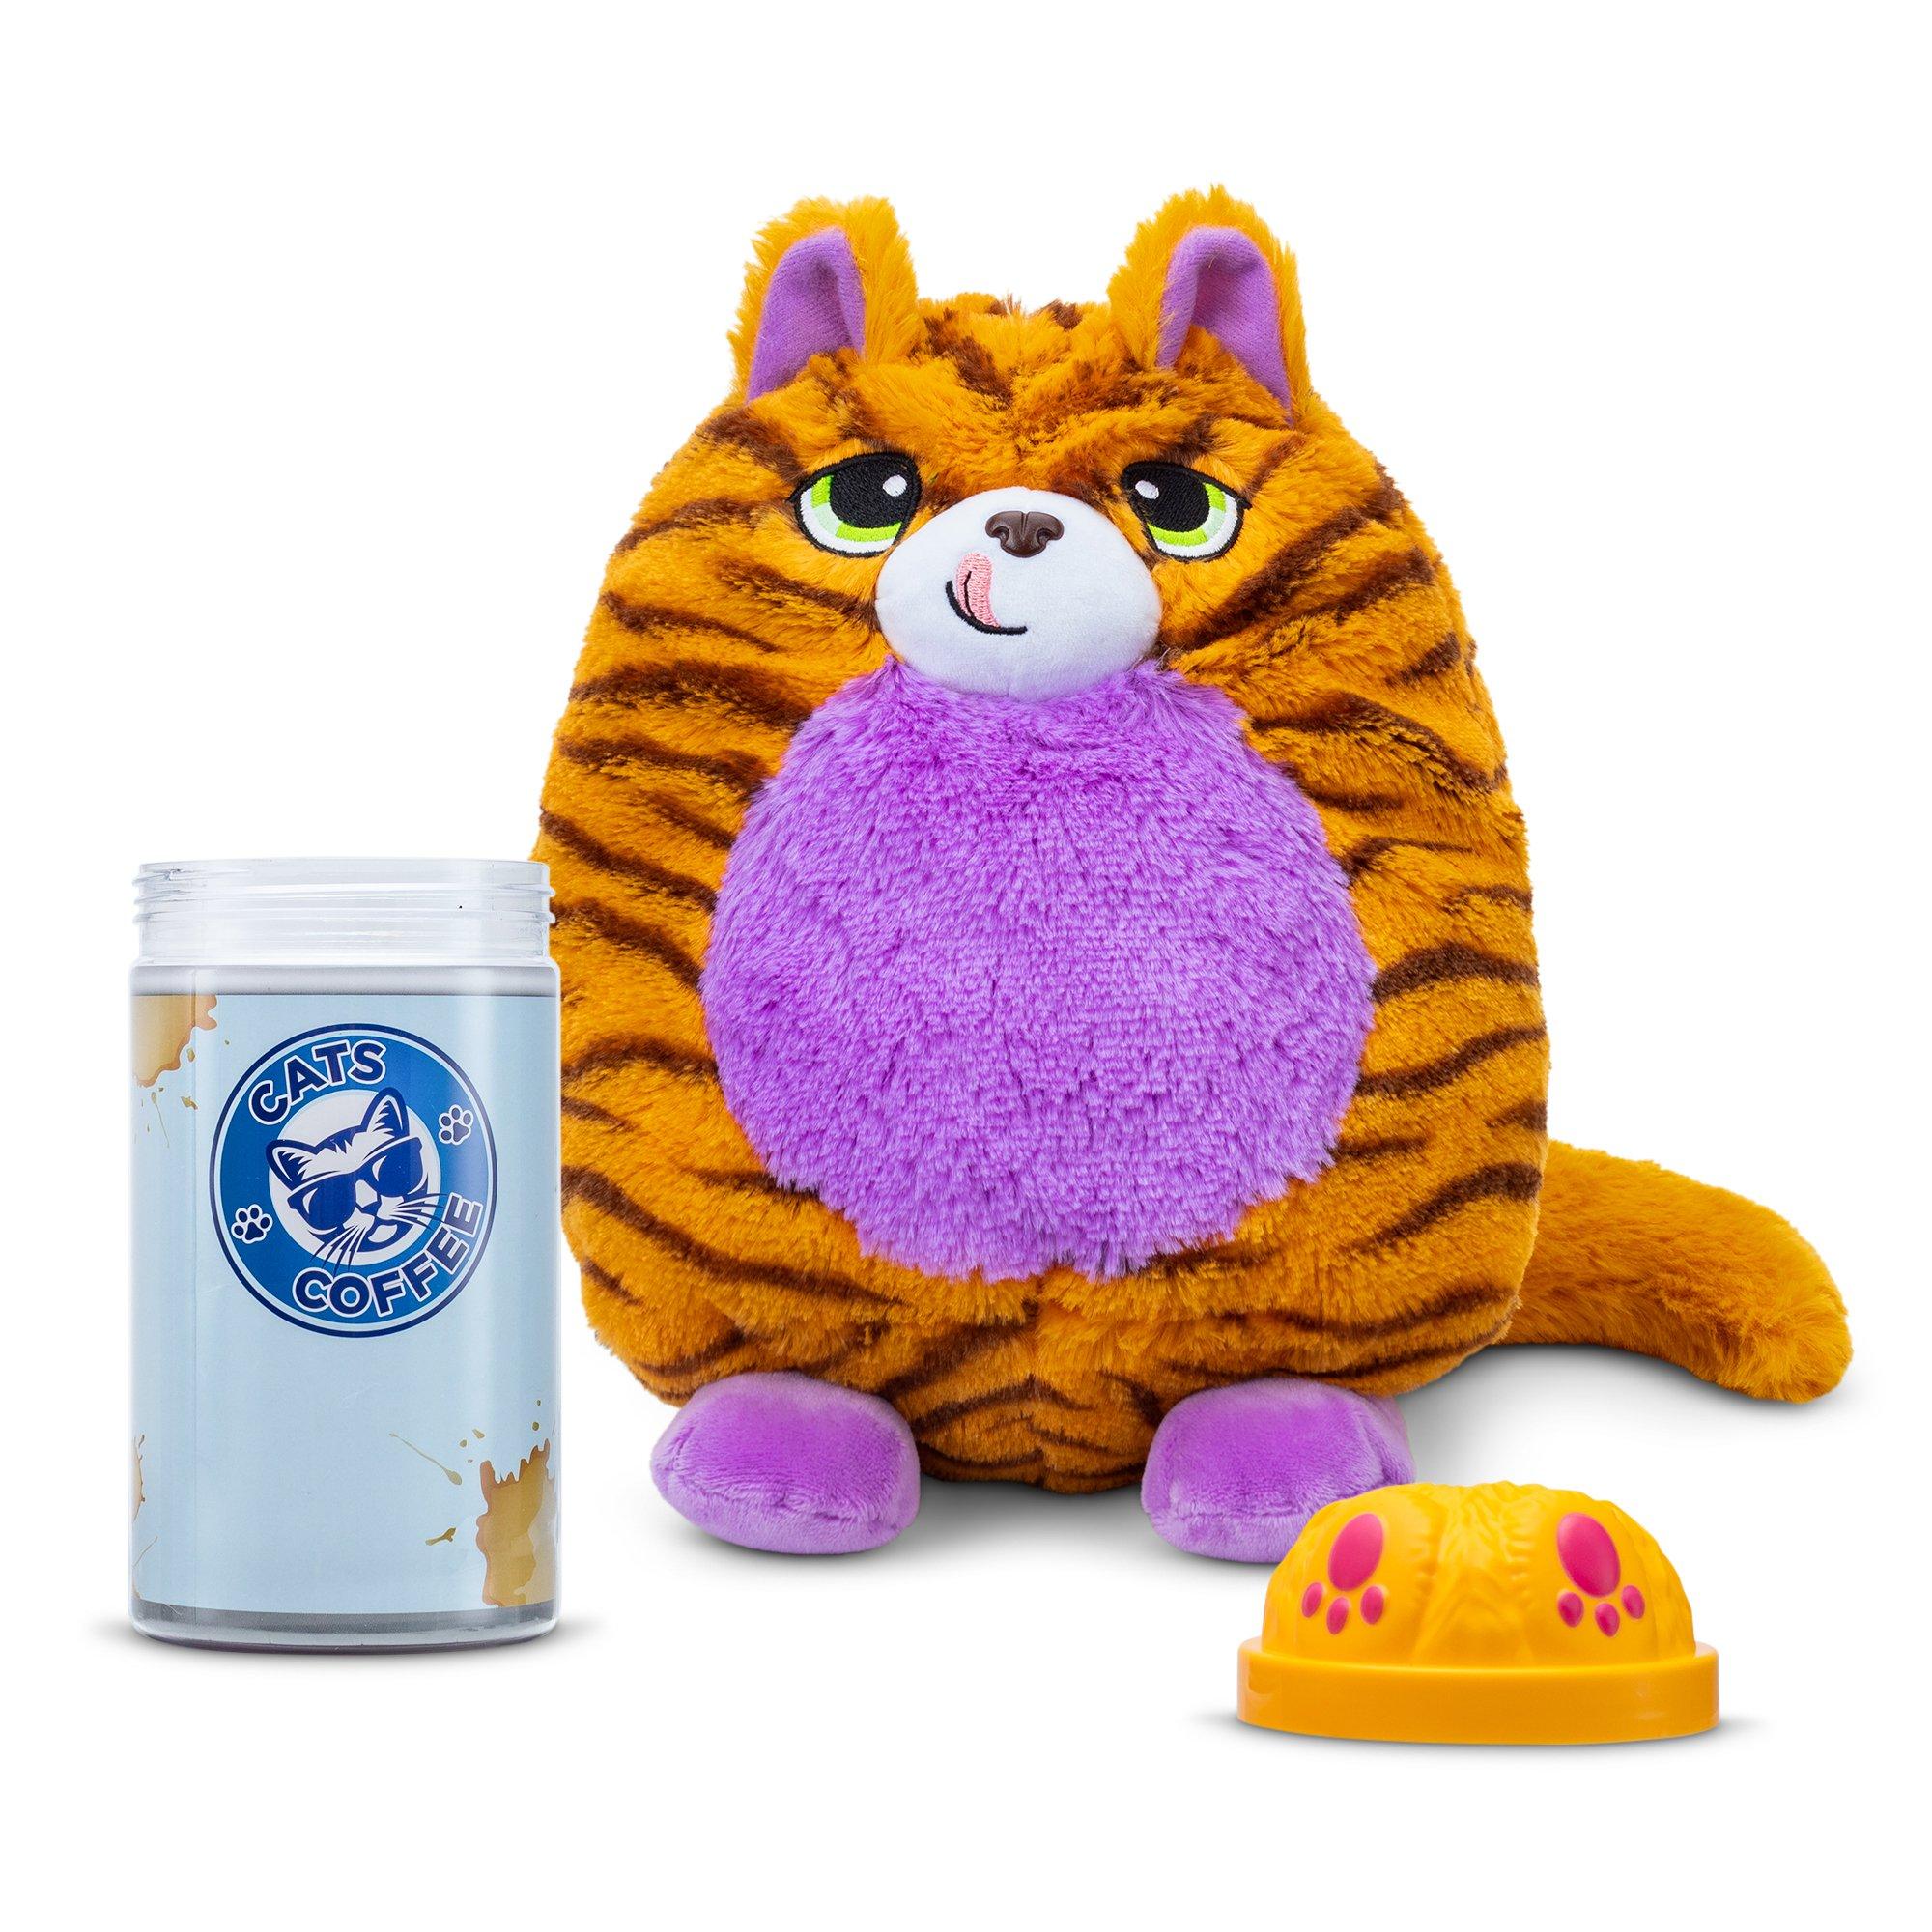 Misfittens Surprise Collectible Squishy Plush (Styles May Vary)